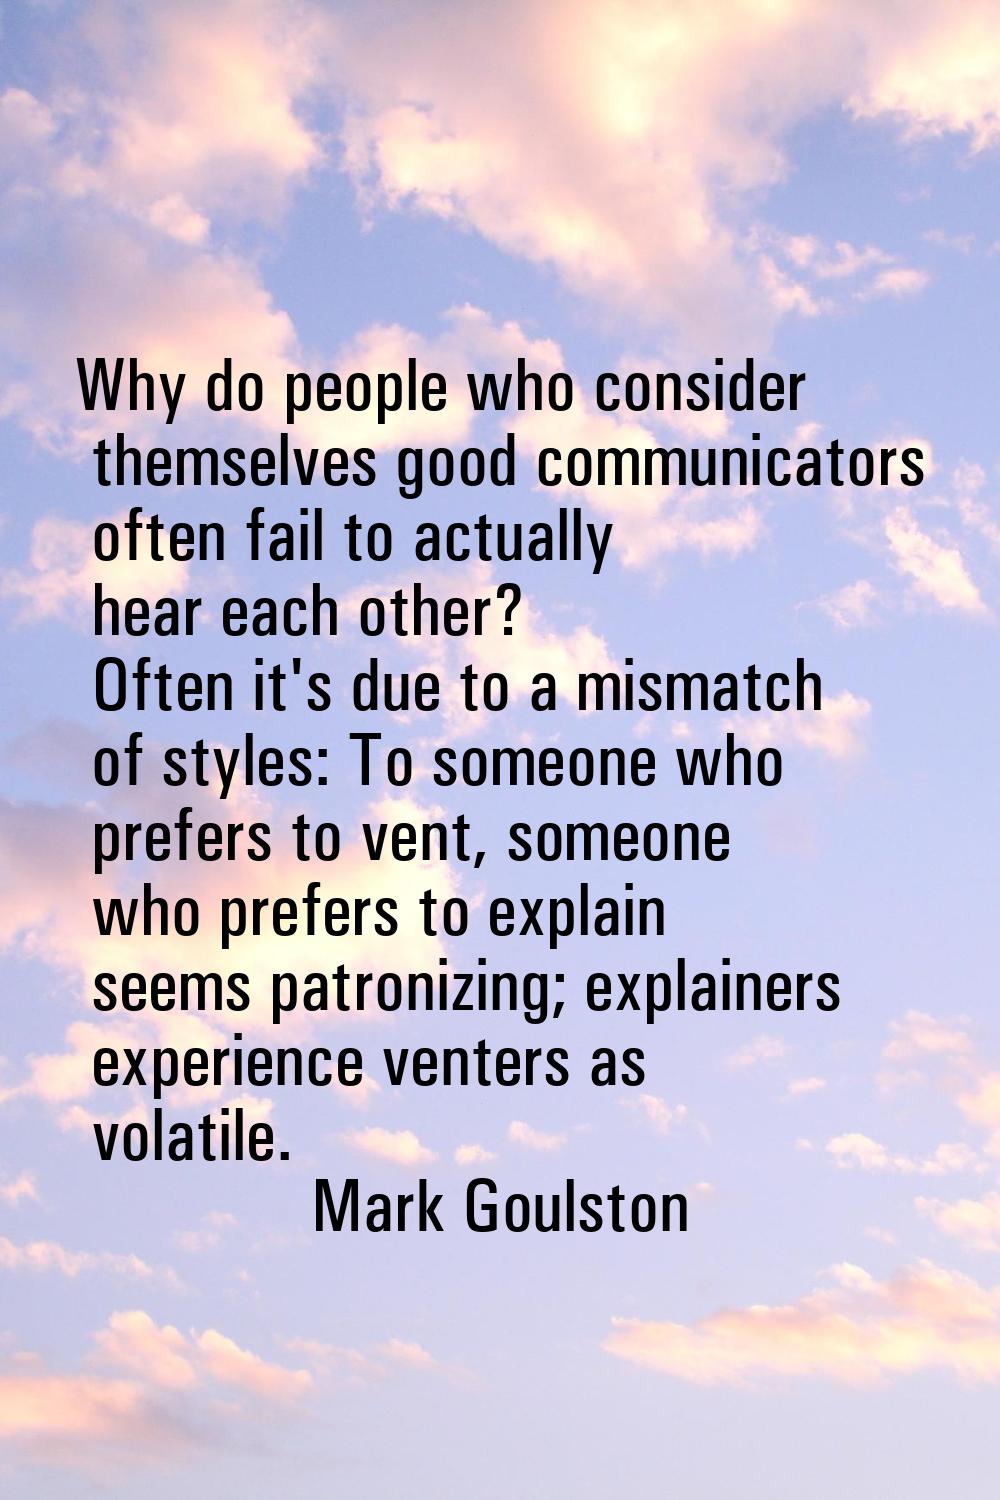 Why do people who consider themselves good communicators often fail to actually hear each other? Of